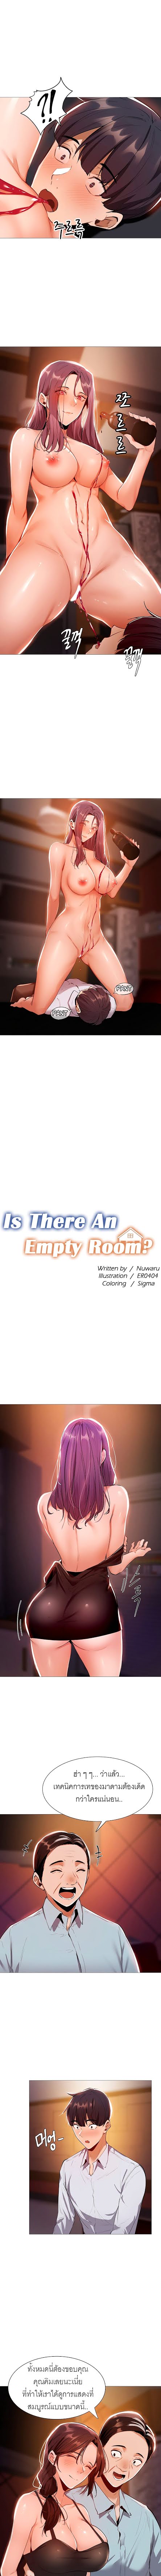 Is There an Empty Room? - หน้า 4